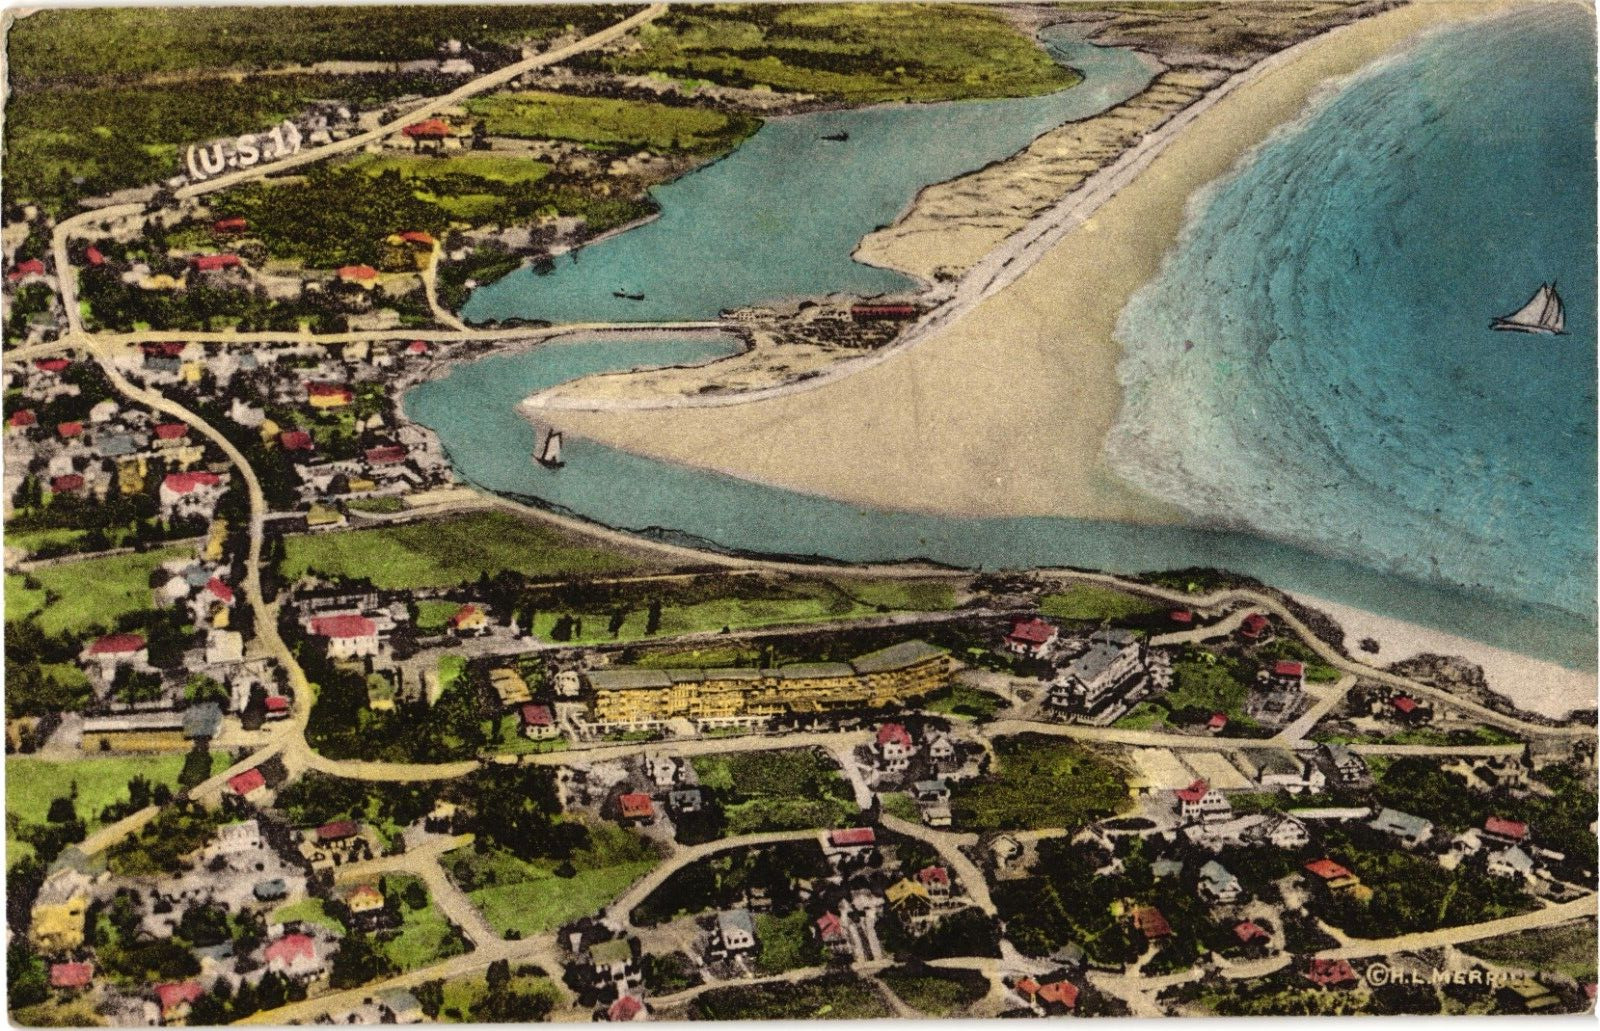 The Lookout Hotel Ogunquit Maine Aerial View Divided Postcard c1915